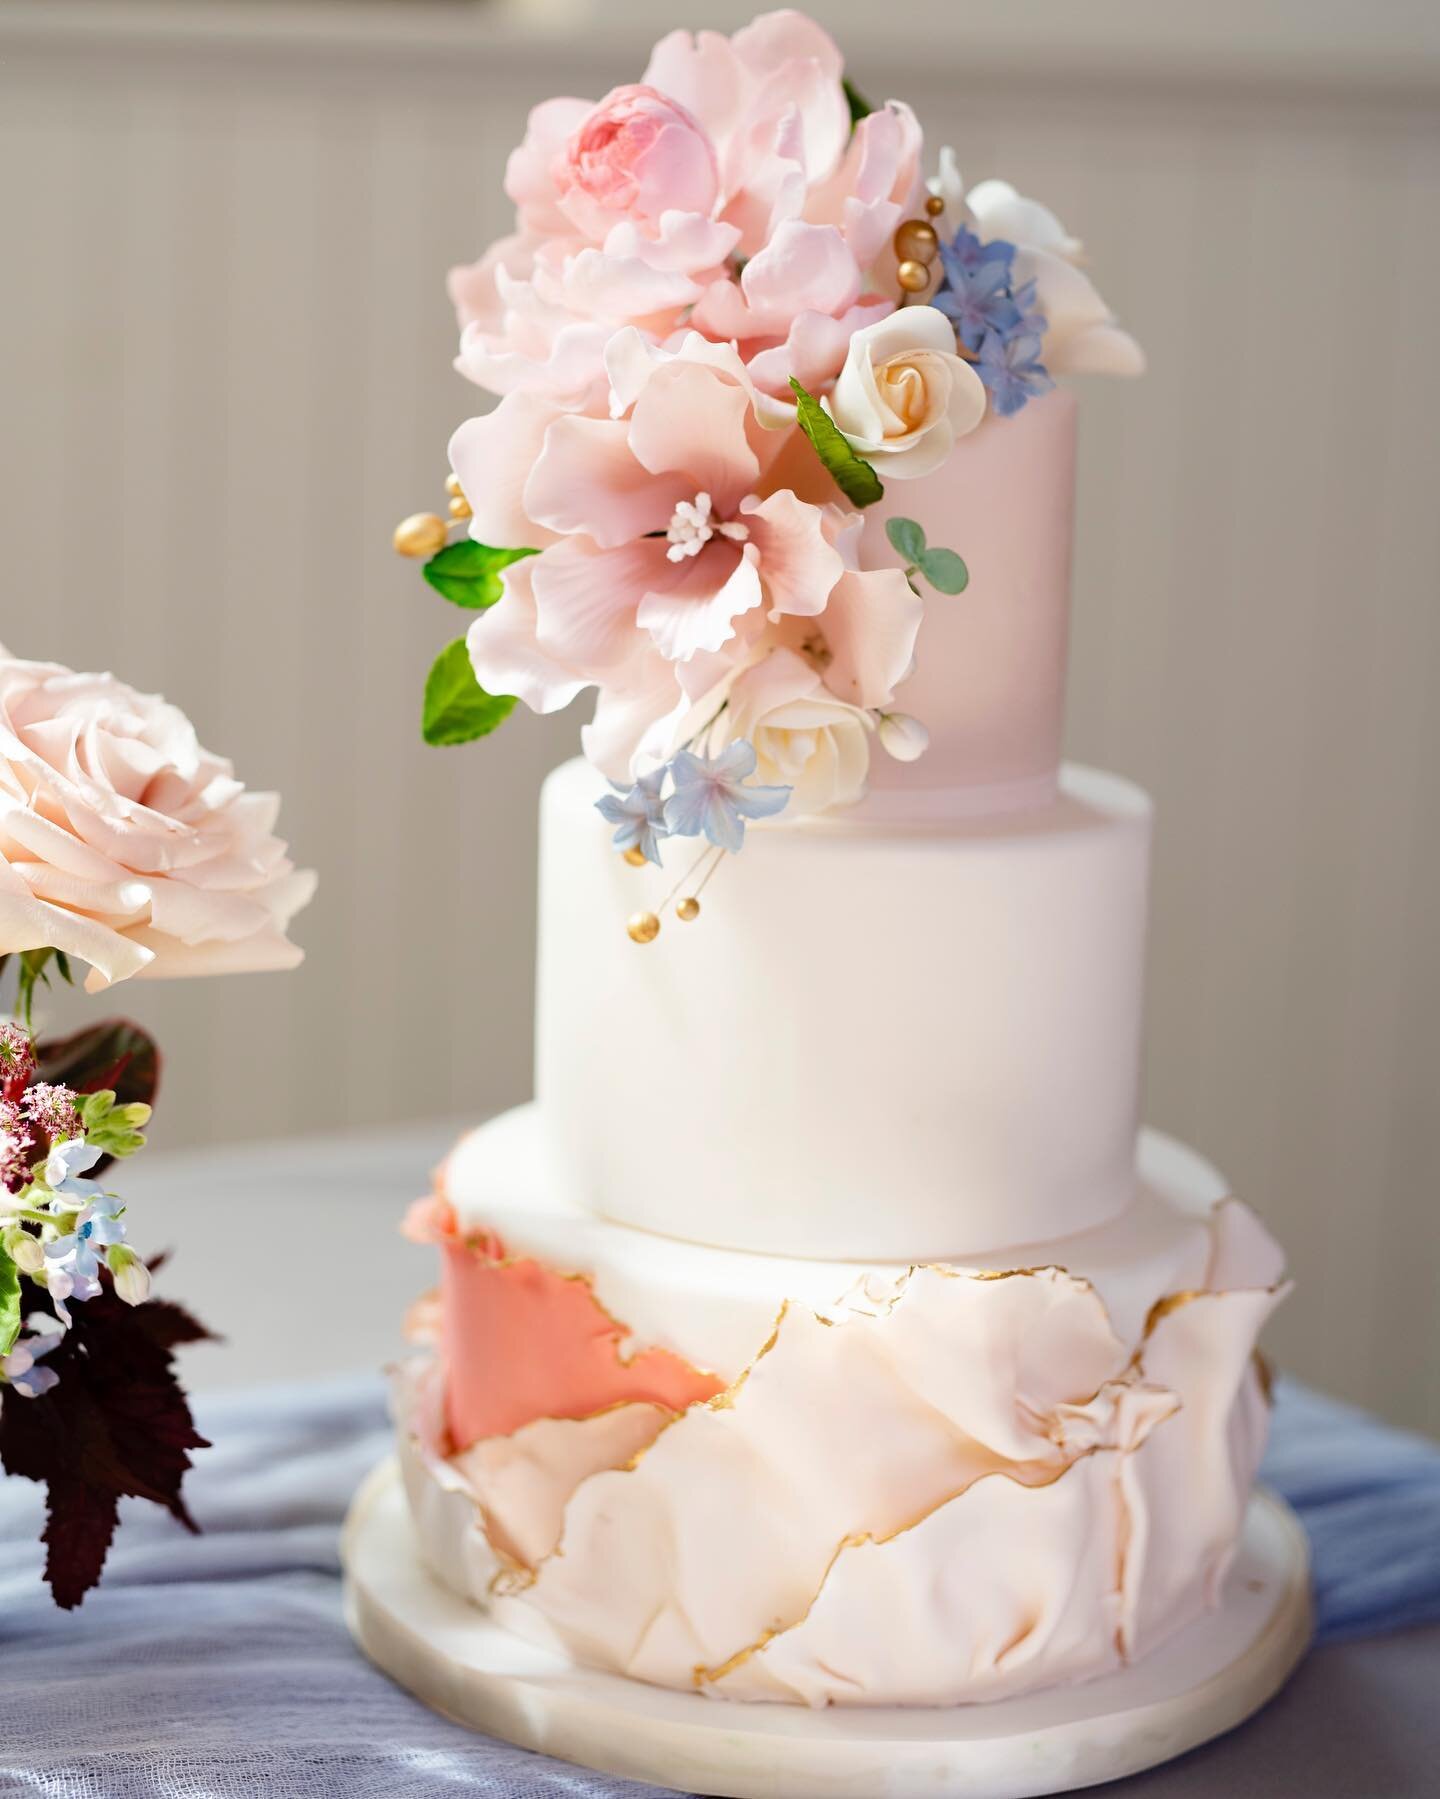 We are excited to share spring everything! This mini 3-tier cake is the perfect little cake for your micro wedding. 
.
.
.
For all those couples who just want to be married already but need a small and elegant cake to complete their sweets, our signa